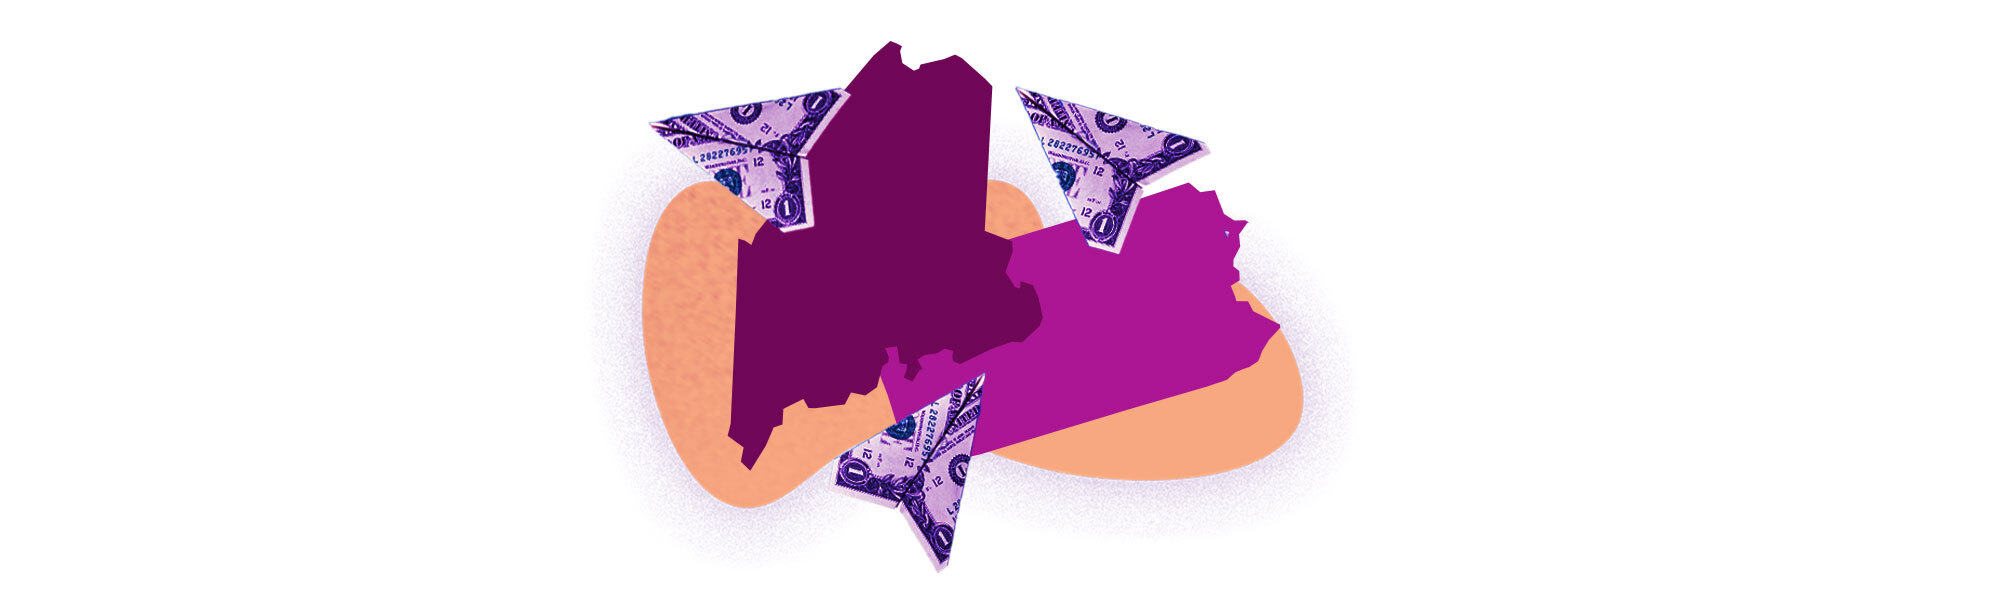 An illustration shows outlines of Pennsylvania and Maine, and paper planes made out of dollar bills.